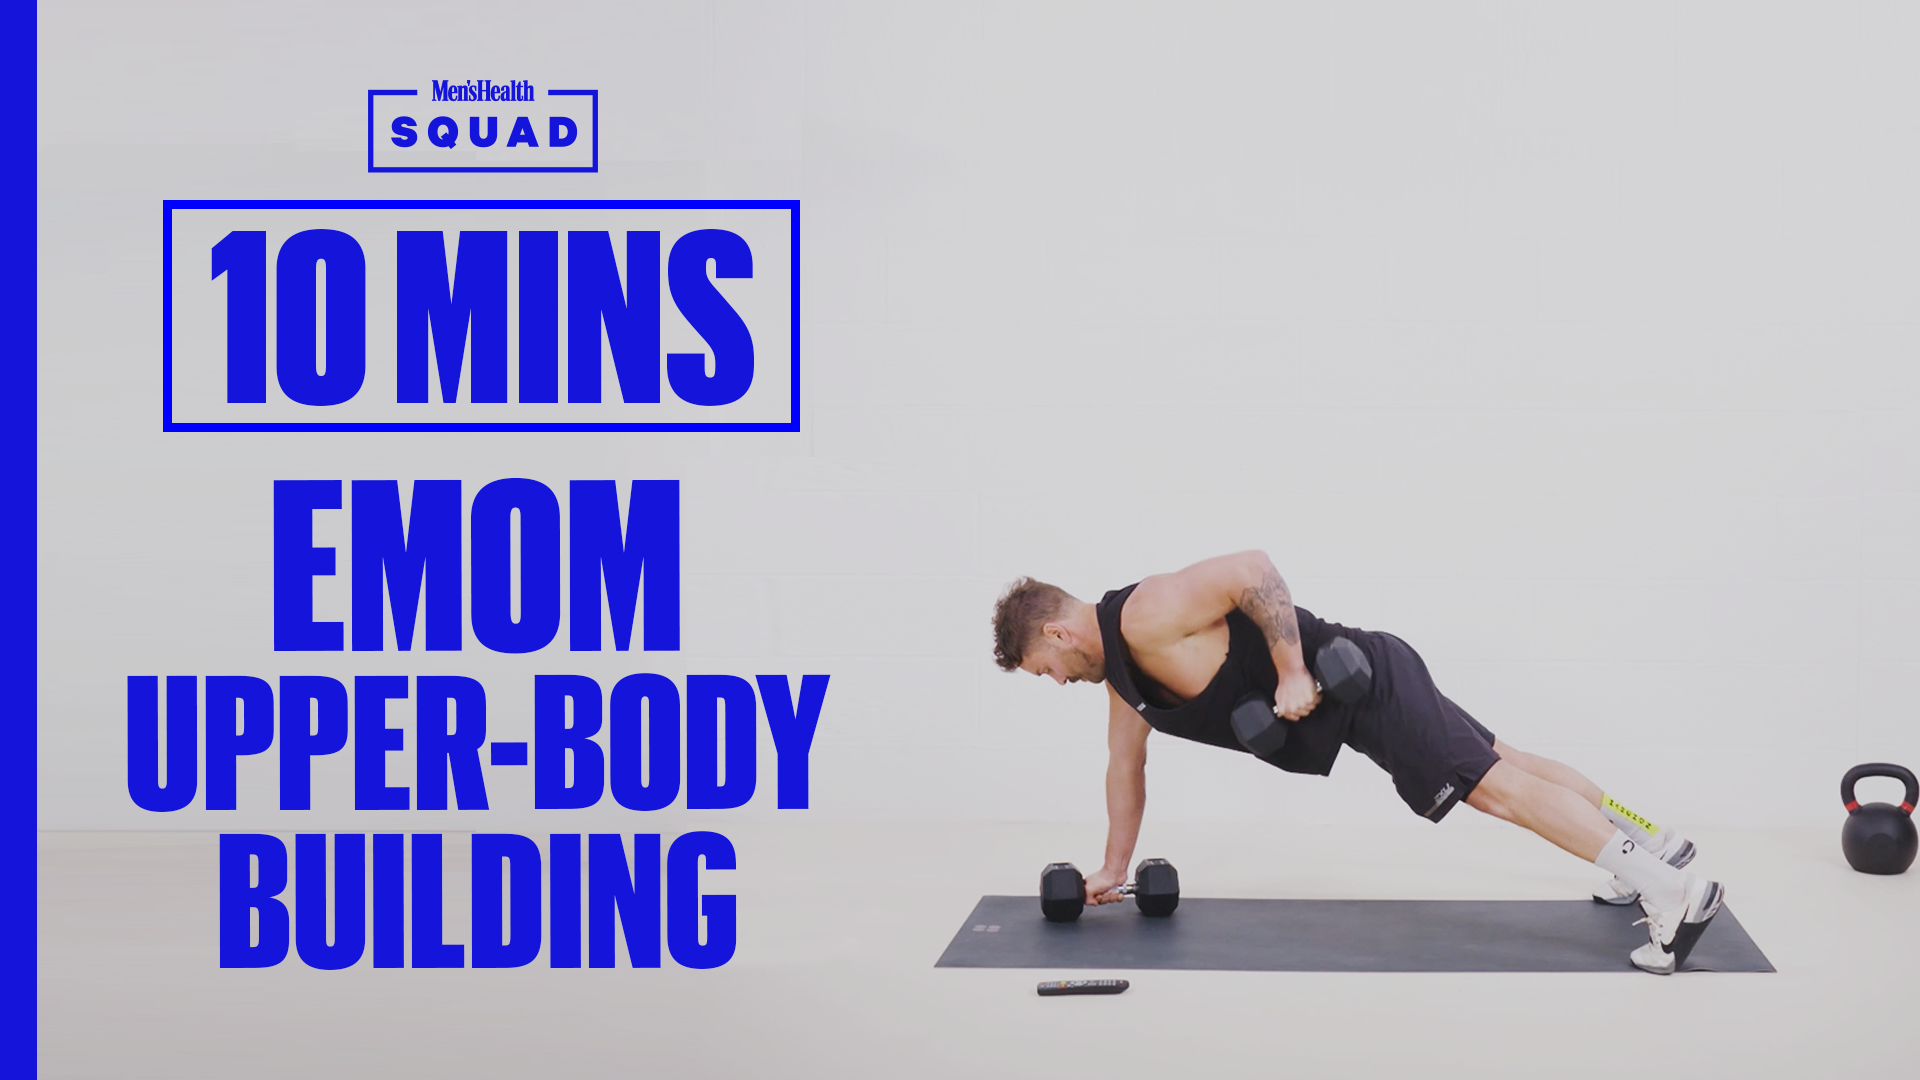 This dumbbell standing arm workout takes 10 minutes to build